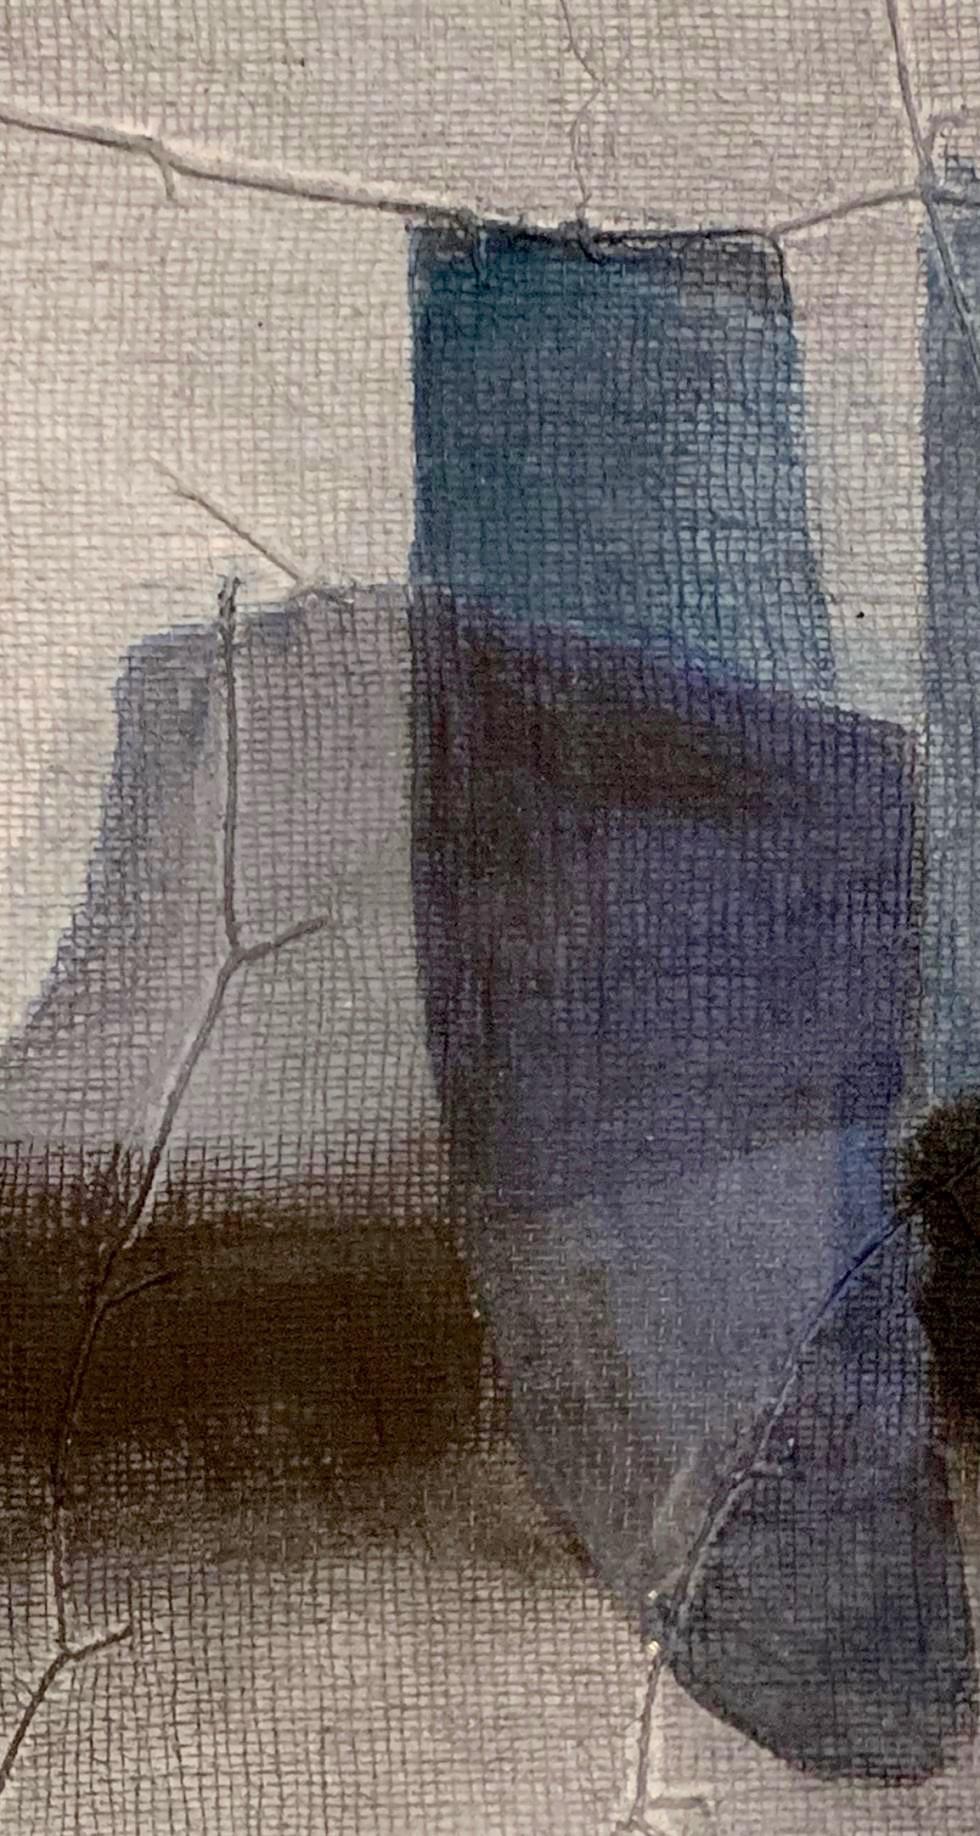 Painting in shades of blue by the contemporary Belgian artist Diane Petry.  She creates her own three layer canvas using pima cotton, gauze and fine paper.
Raw edges and applied threads add texture and dimension
All artwork can be commissioned for